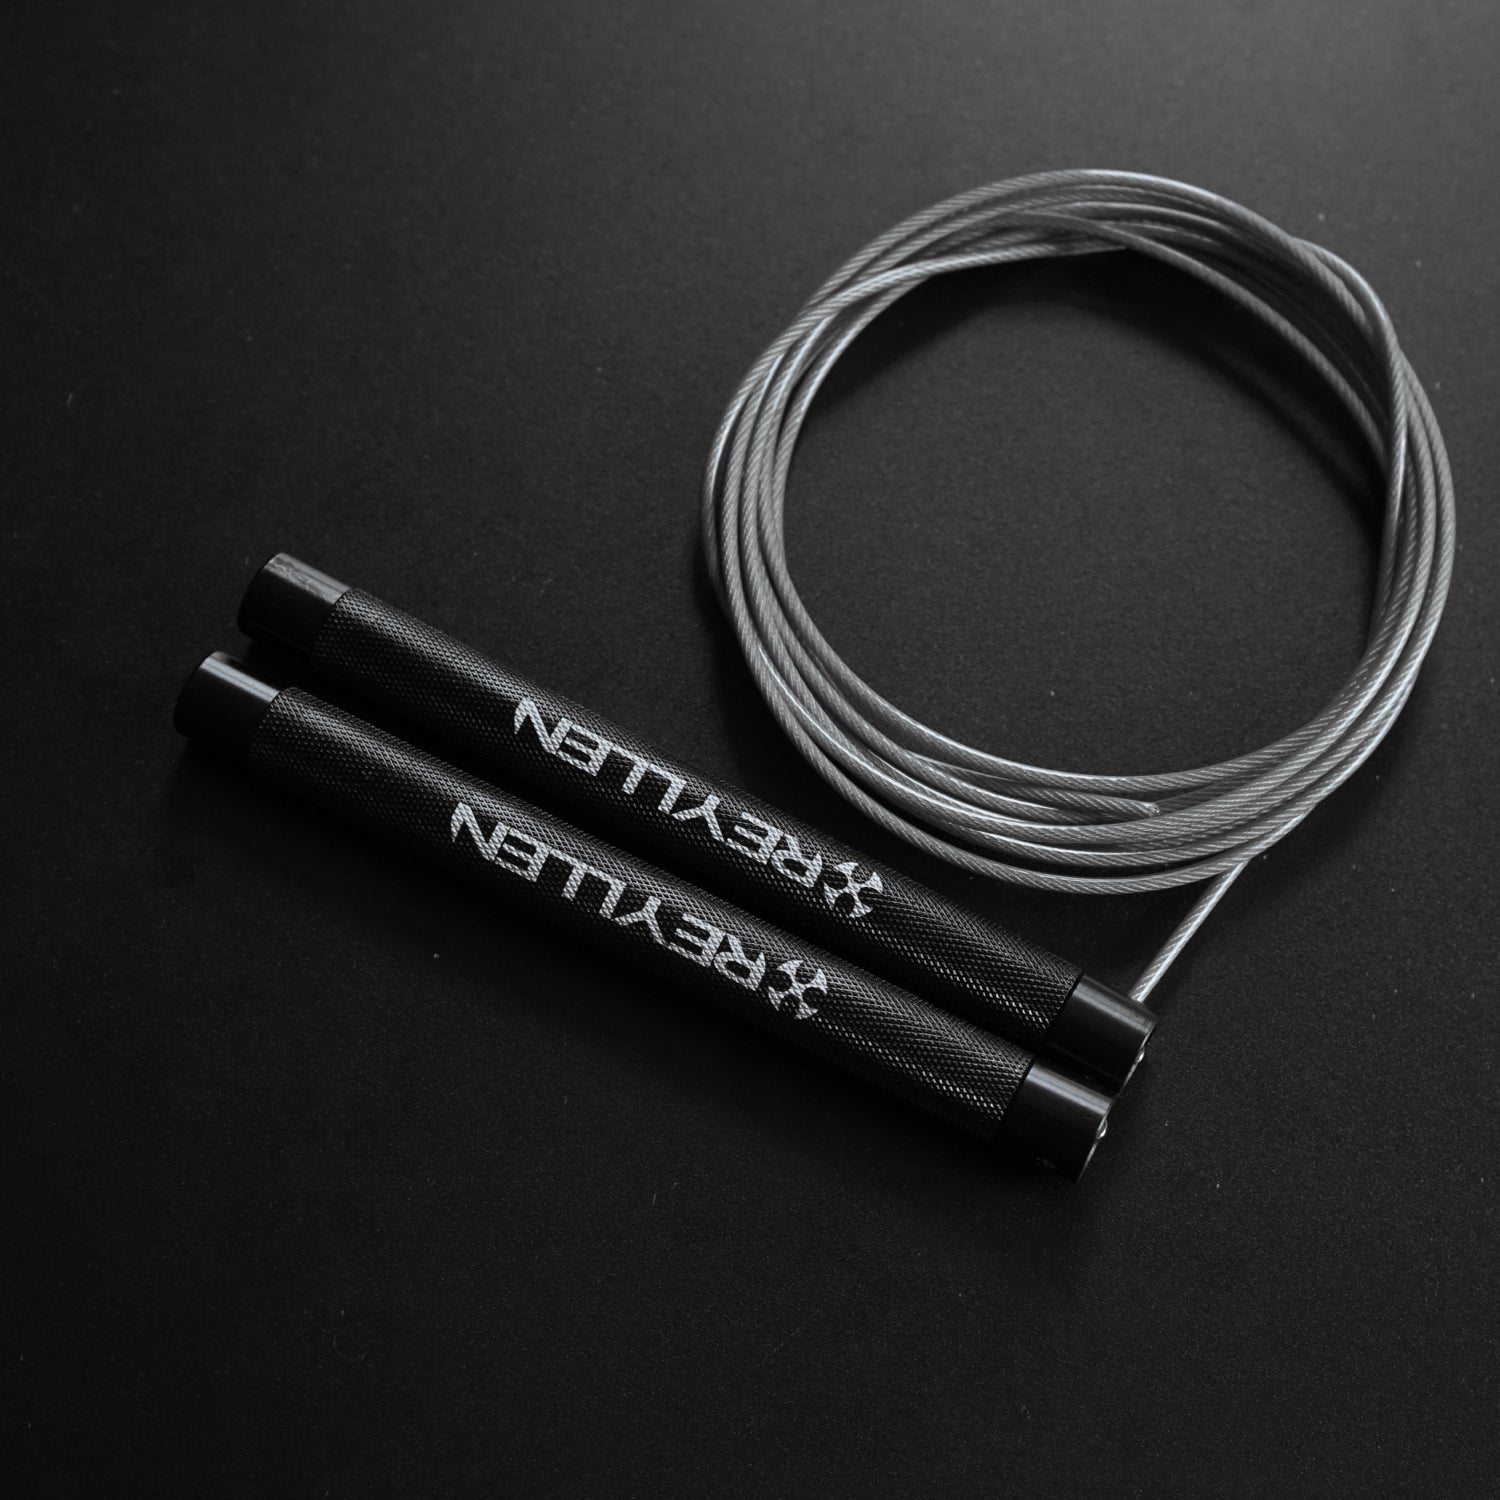 Reyllen Flare Mx Speed Skipping Jump Rope - Aluminium Handles - black with grey pvc cable alternate view